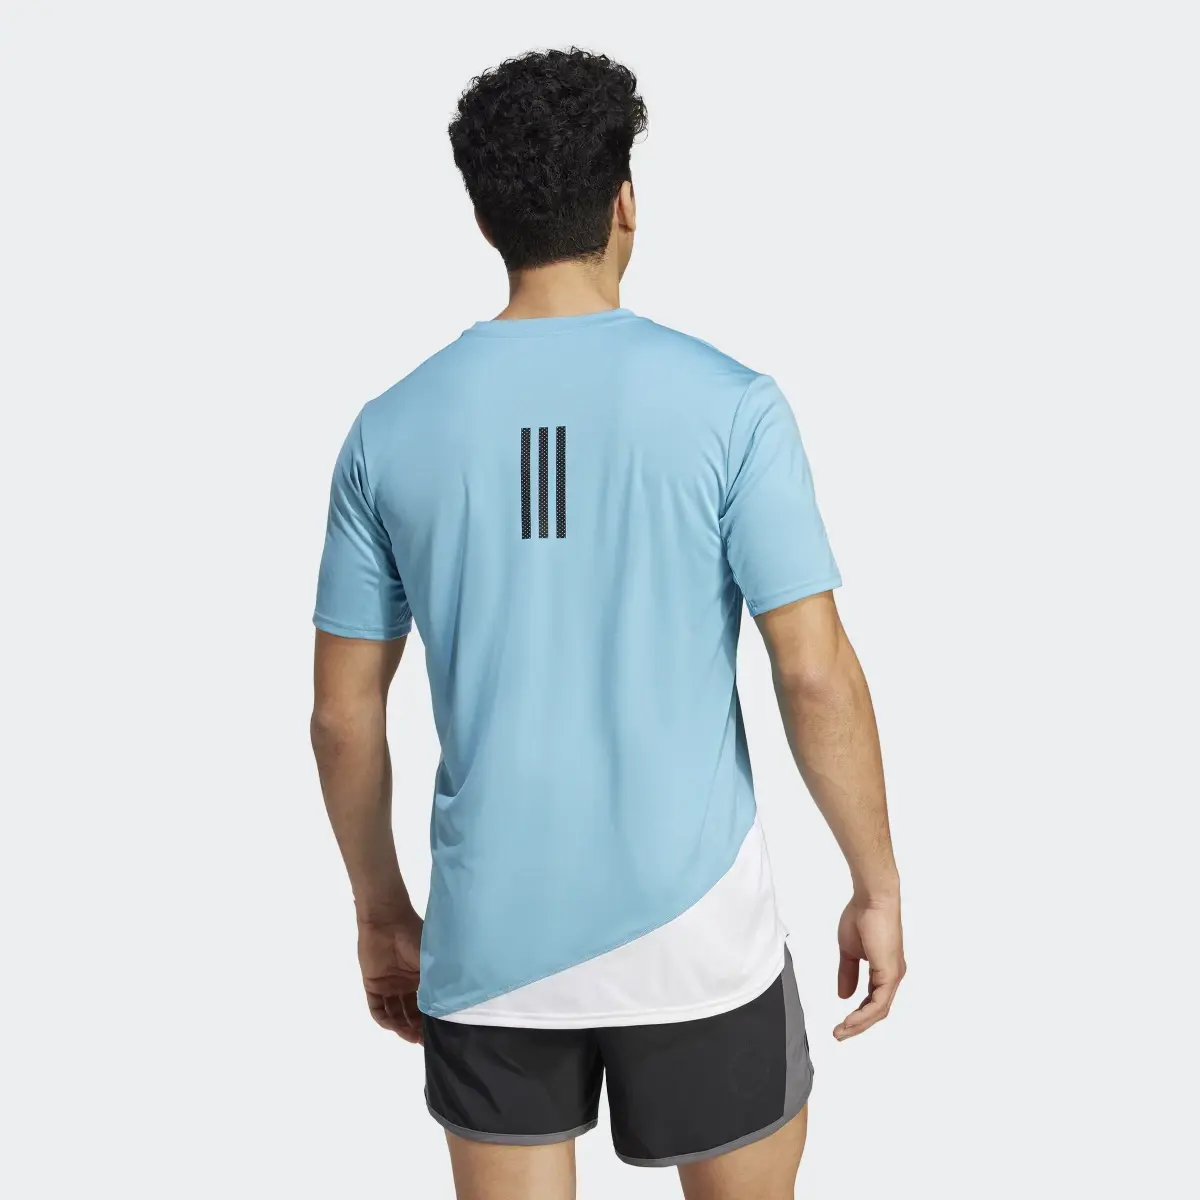 Adidas Made to be Remade Running T-Shirt. 3